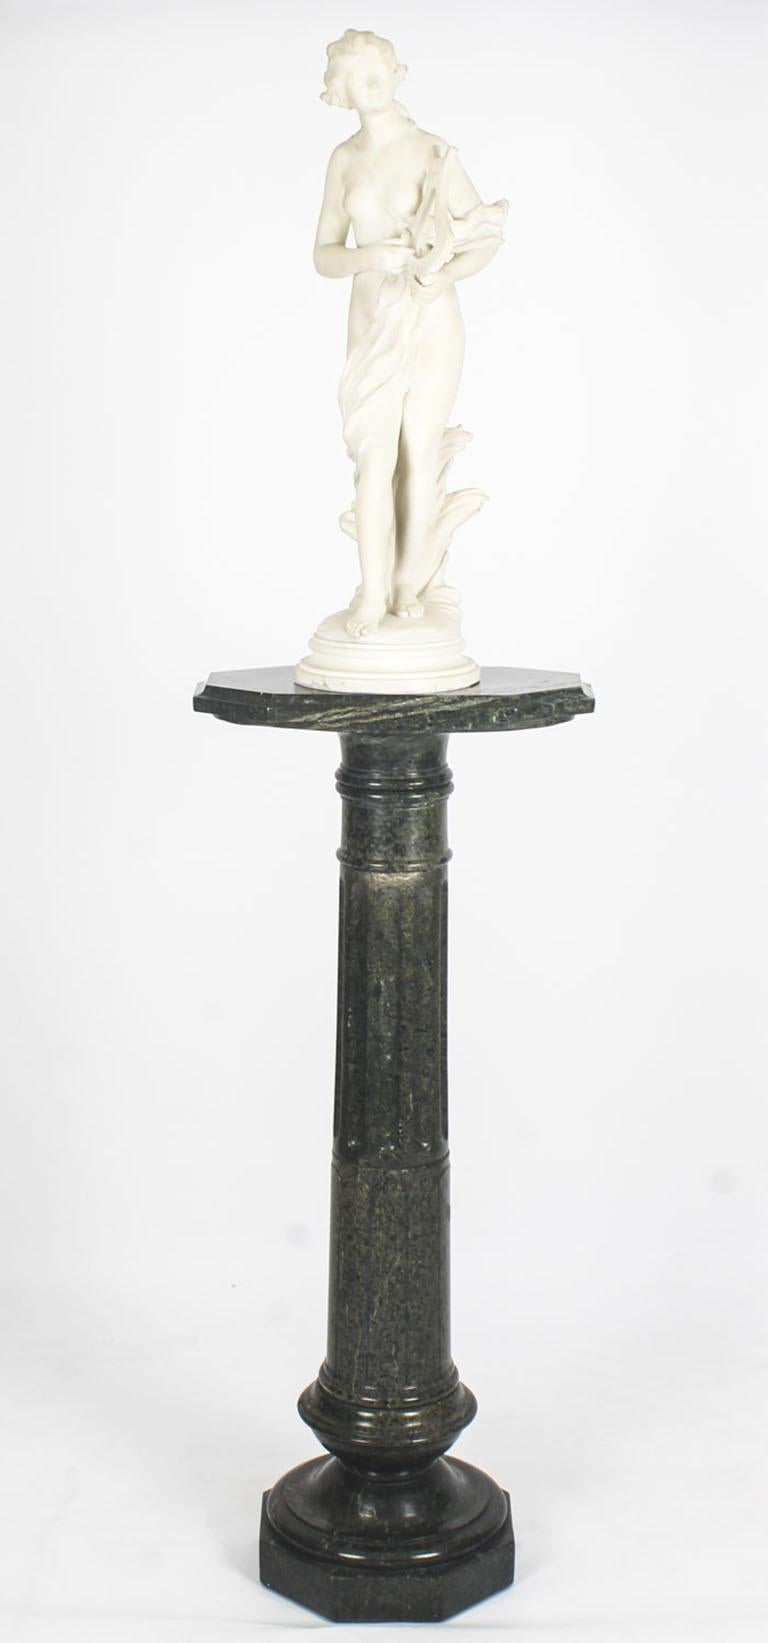 A lovely antique French Verde Antico green marble pedestal, late 19th century in date.

The pedestal is assembled in three interlocking sections and has a shaped rectangular moulded platform top which is raised on a turned and fluted column